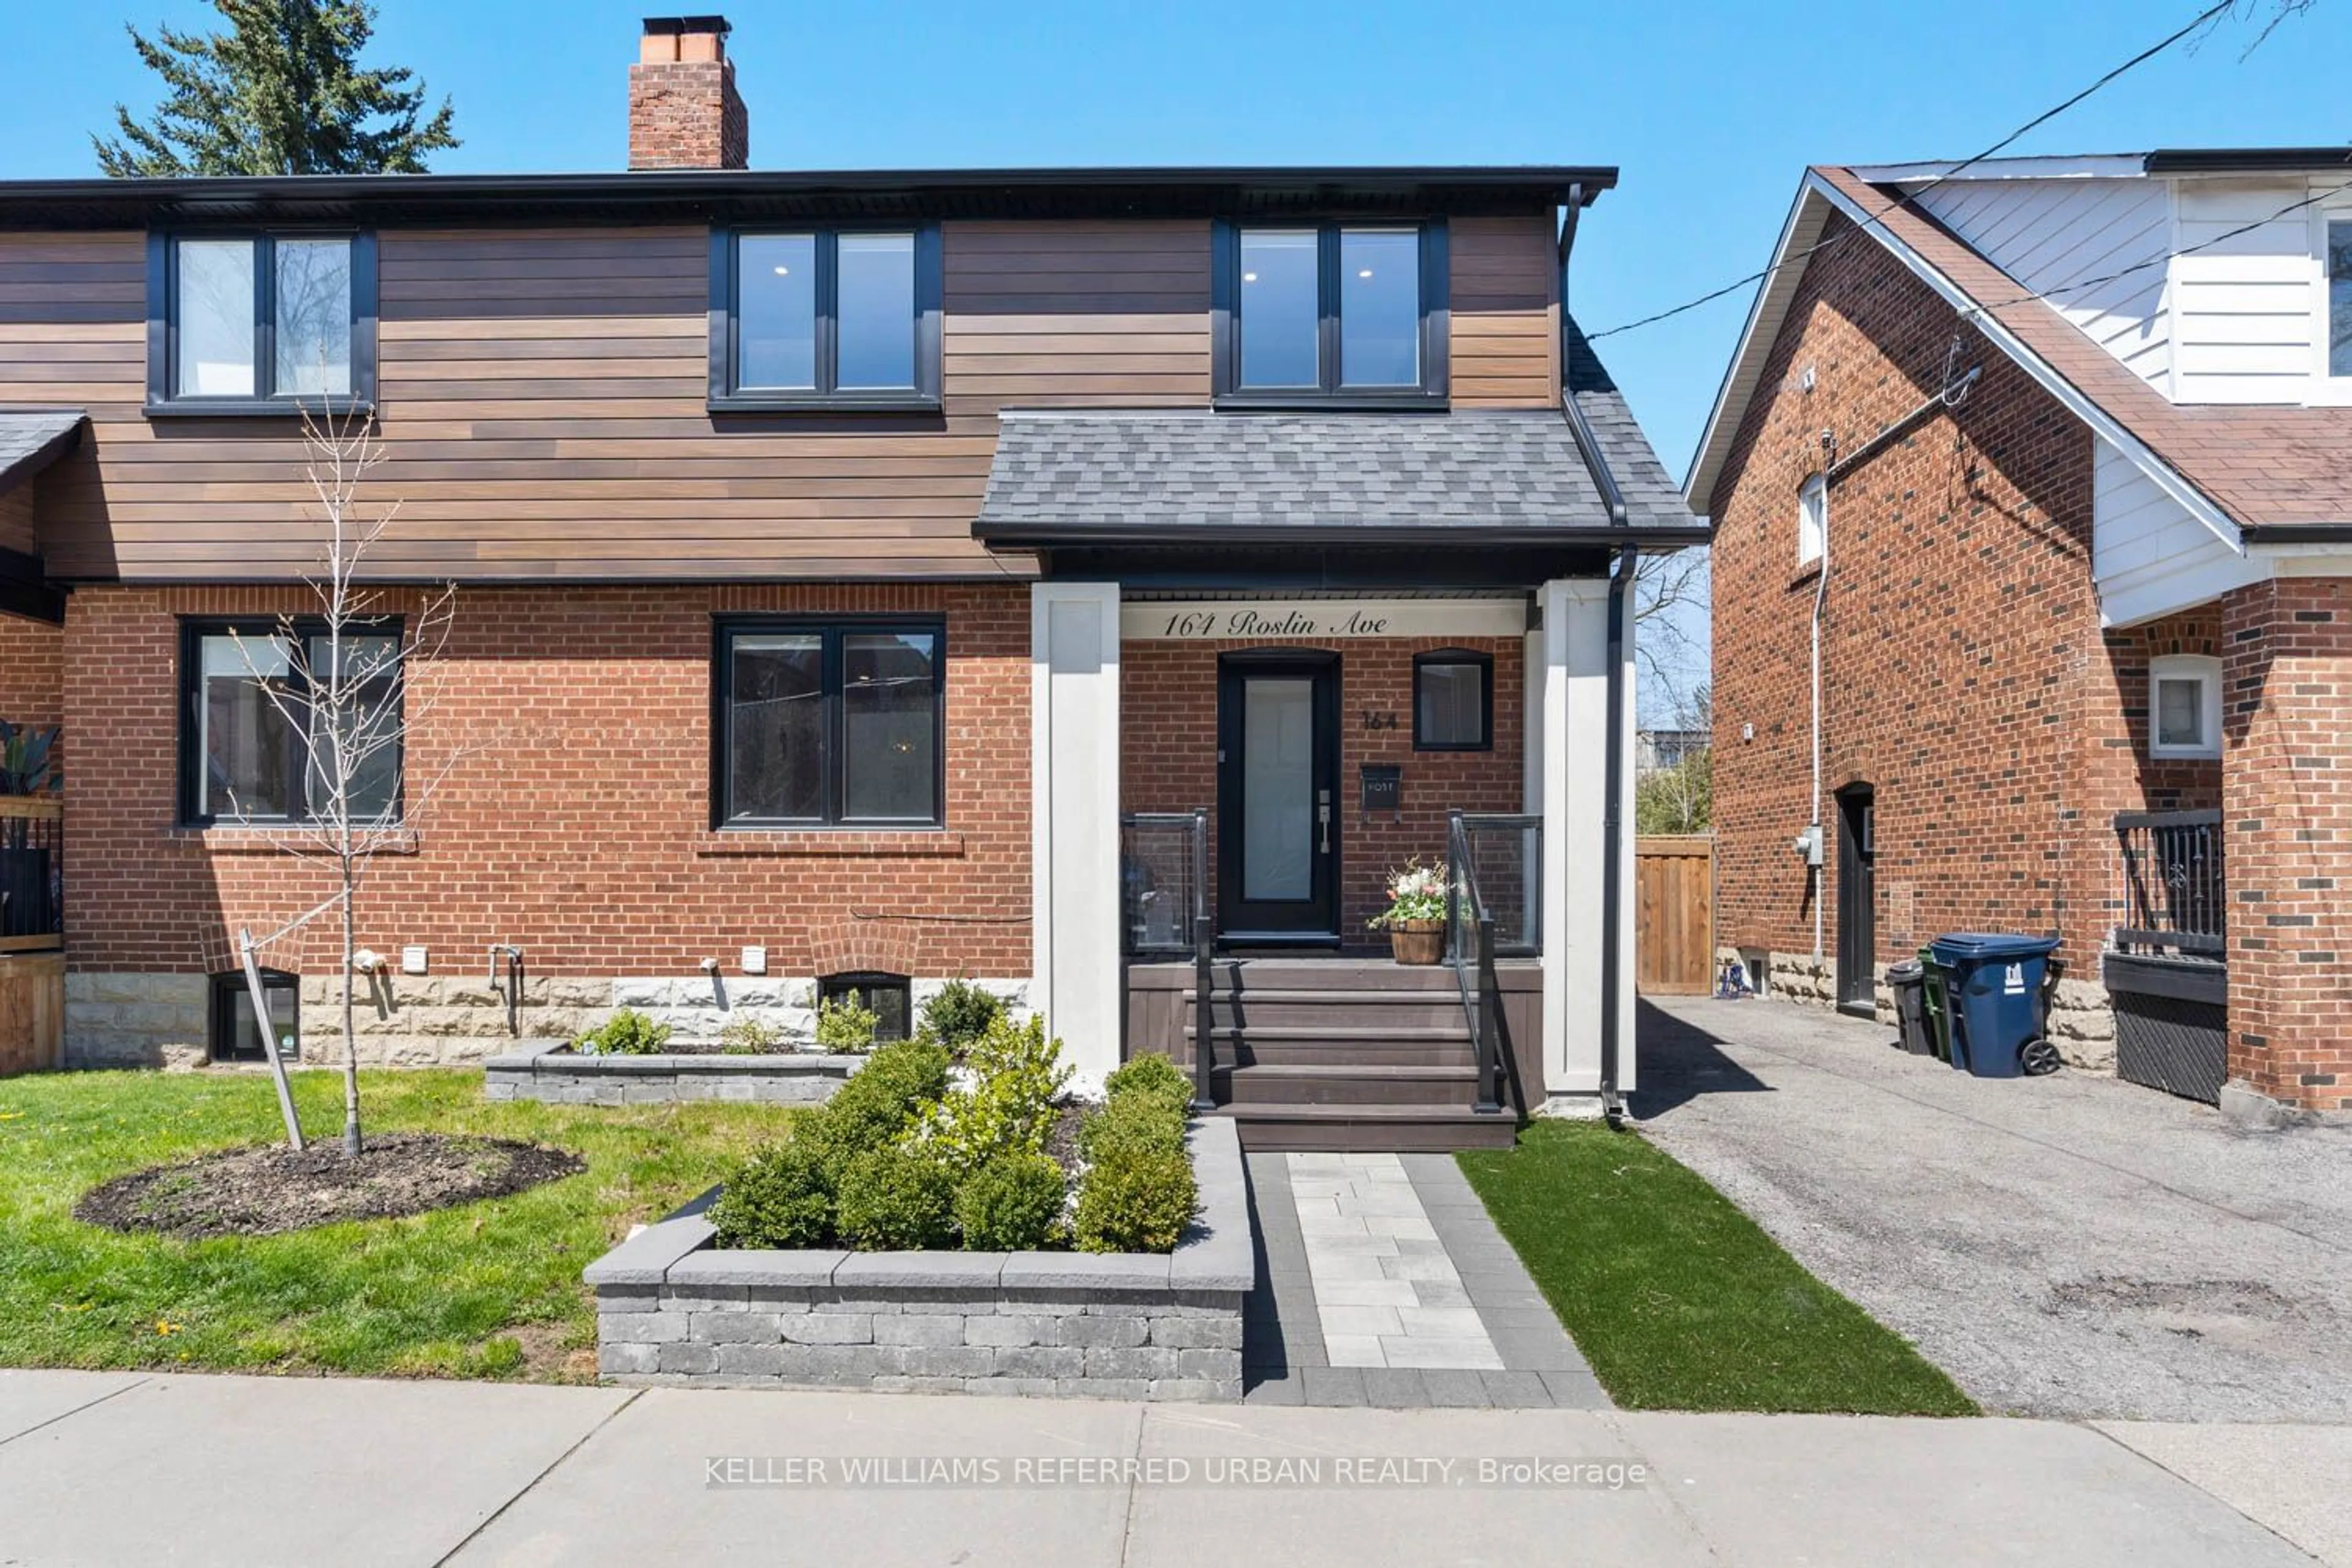 Home with brick exterior material for 164 Roslin Ave, Toronto Ontario M4N 1Z6